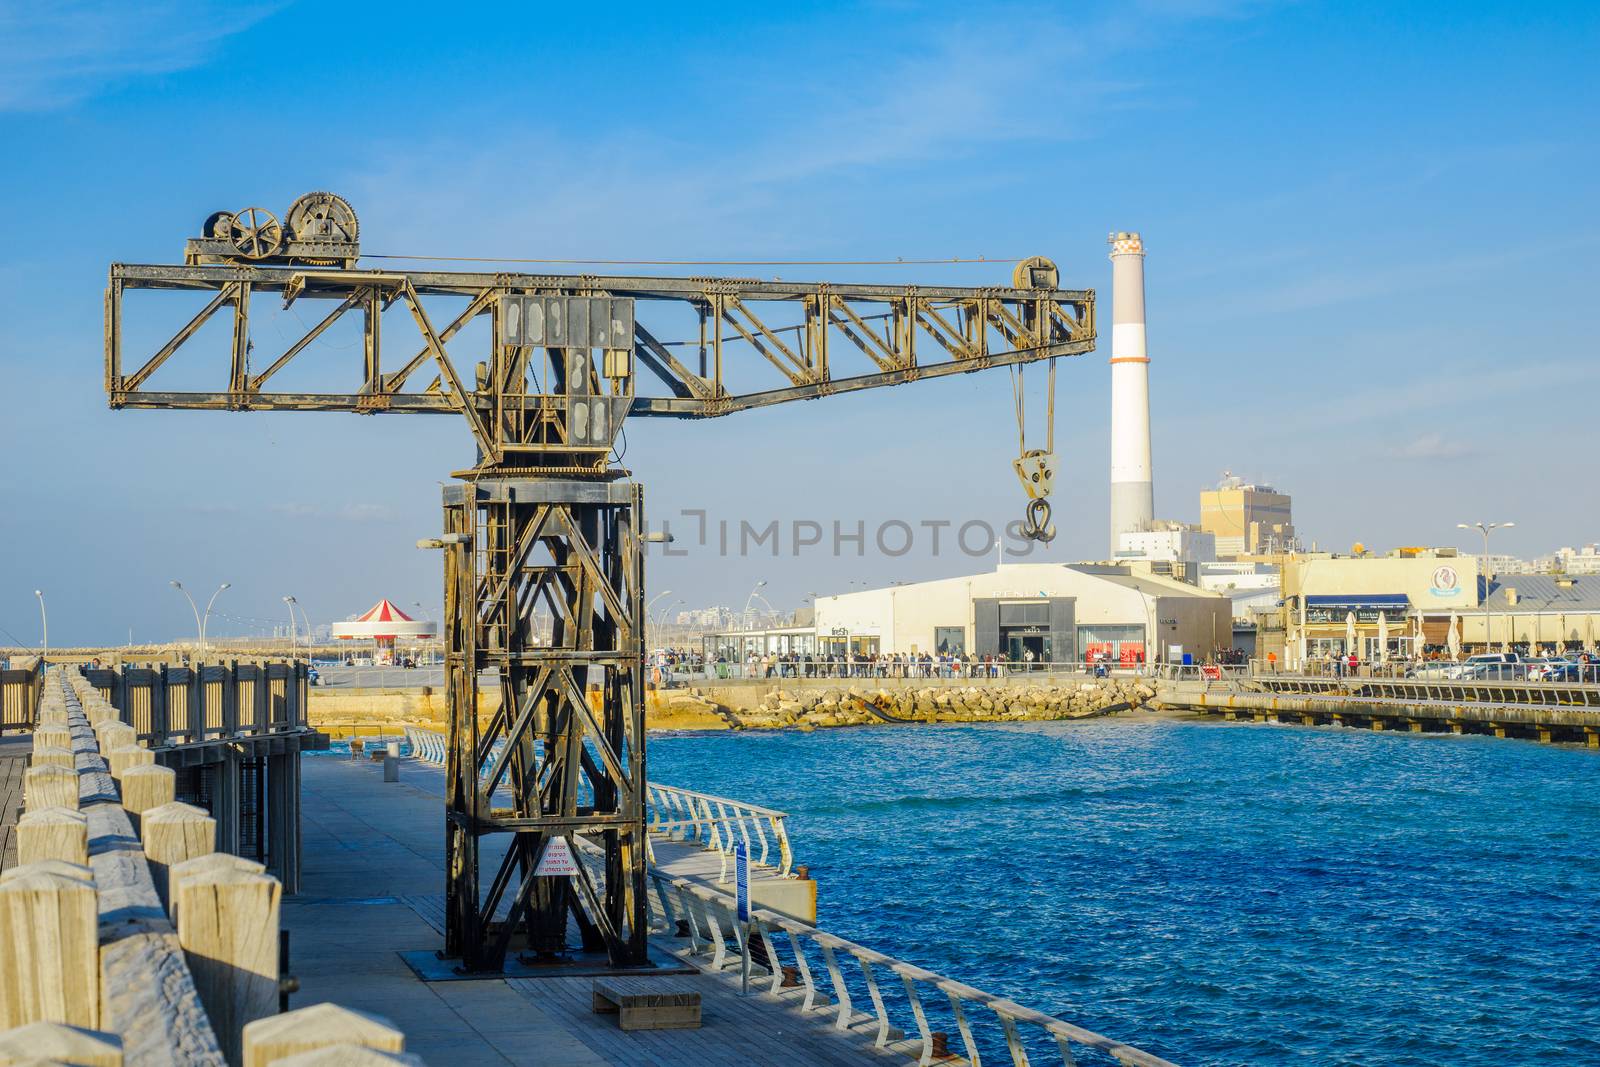 TEL-AVIV, ISRAEL - JANUARY 12, 2017: Scene with a restored crane, a carrousel, a commercial area, the Reading power station chimney, and visitors, in Tel-Aviv Port, Tel-Aviv, Israel